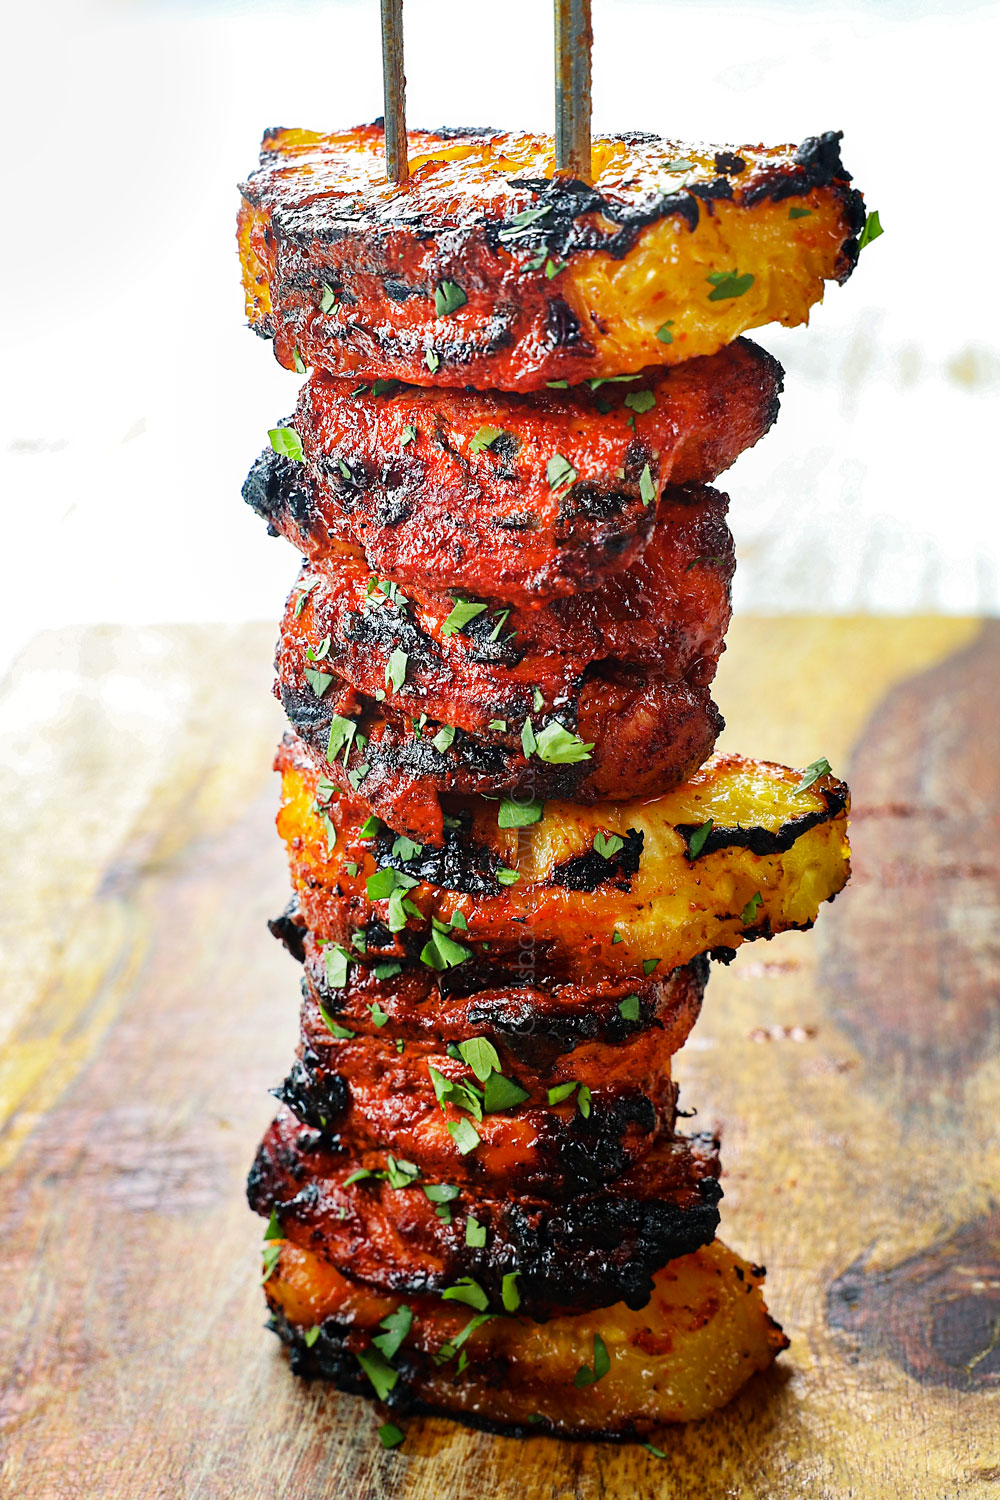 chicken al pastor after it's cooked showing how juicy it is